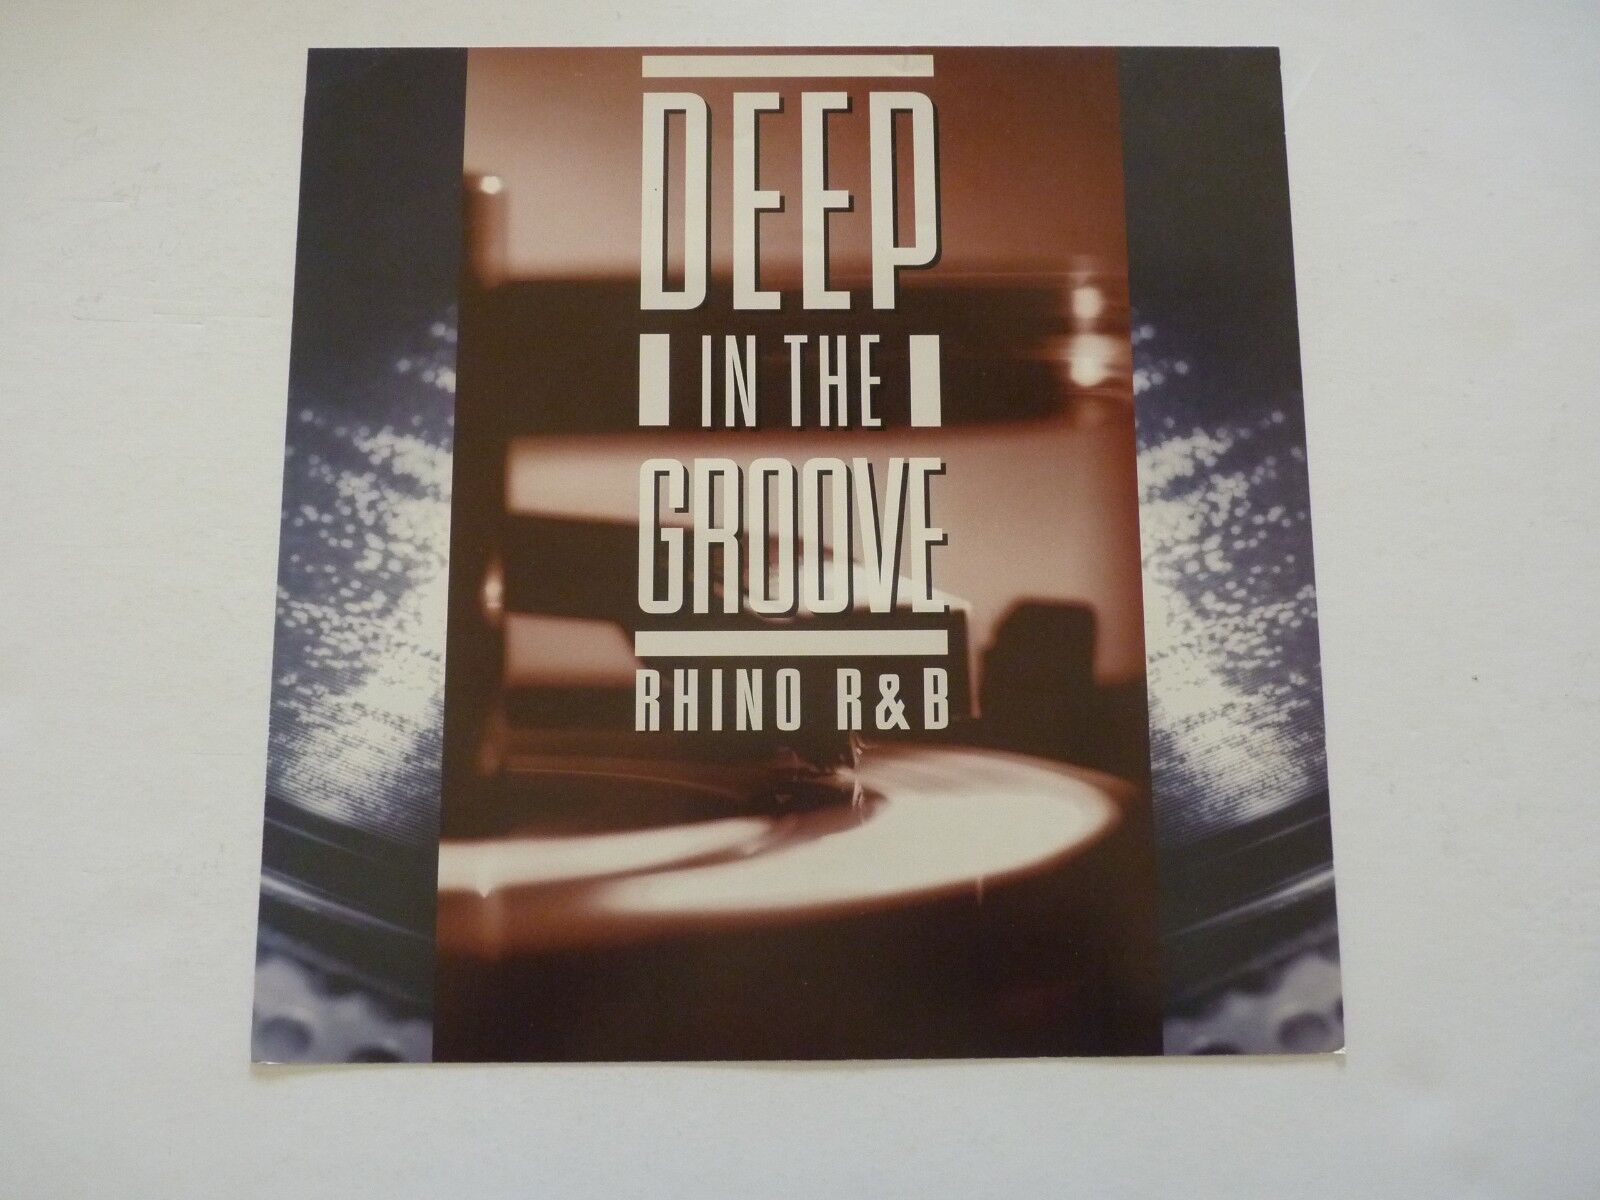 Deep In the Groove Rhino R&B Promo LP Record Photo Poster painting Flat 12x12 Poster Otis Aretha